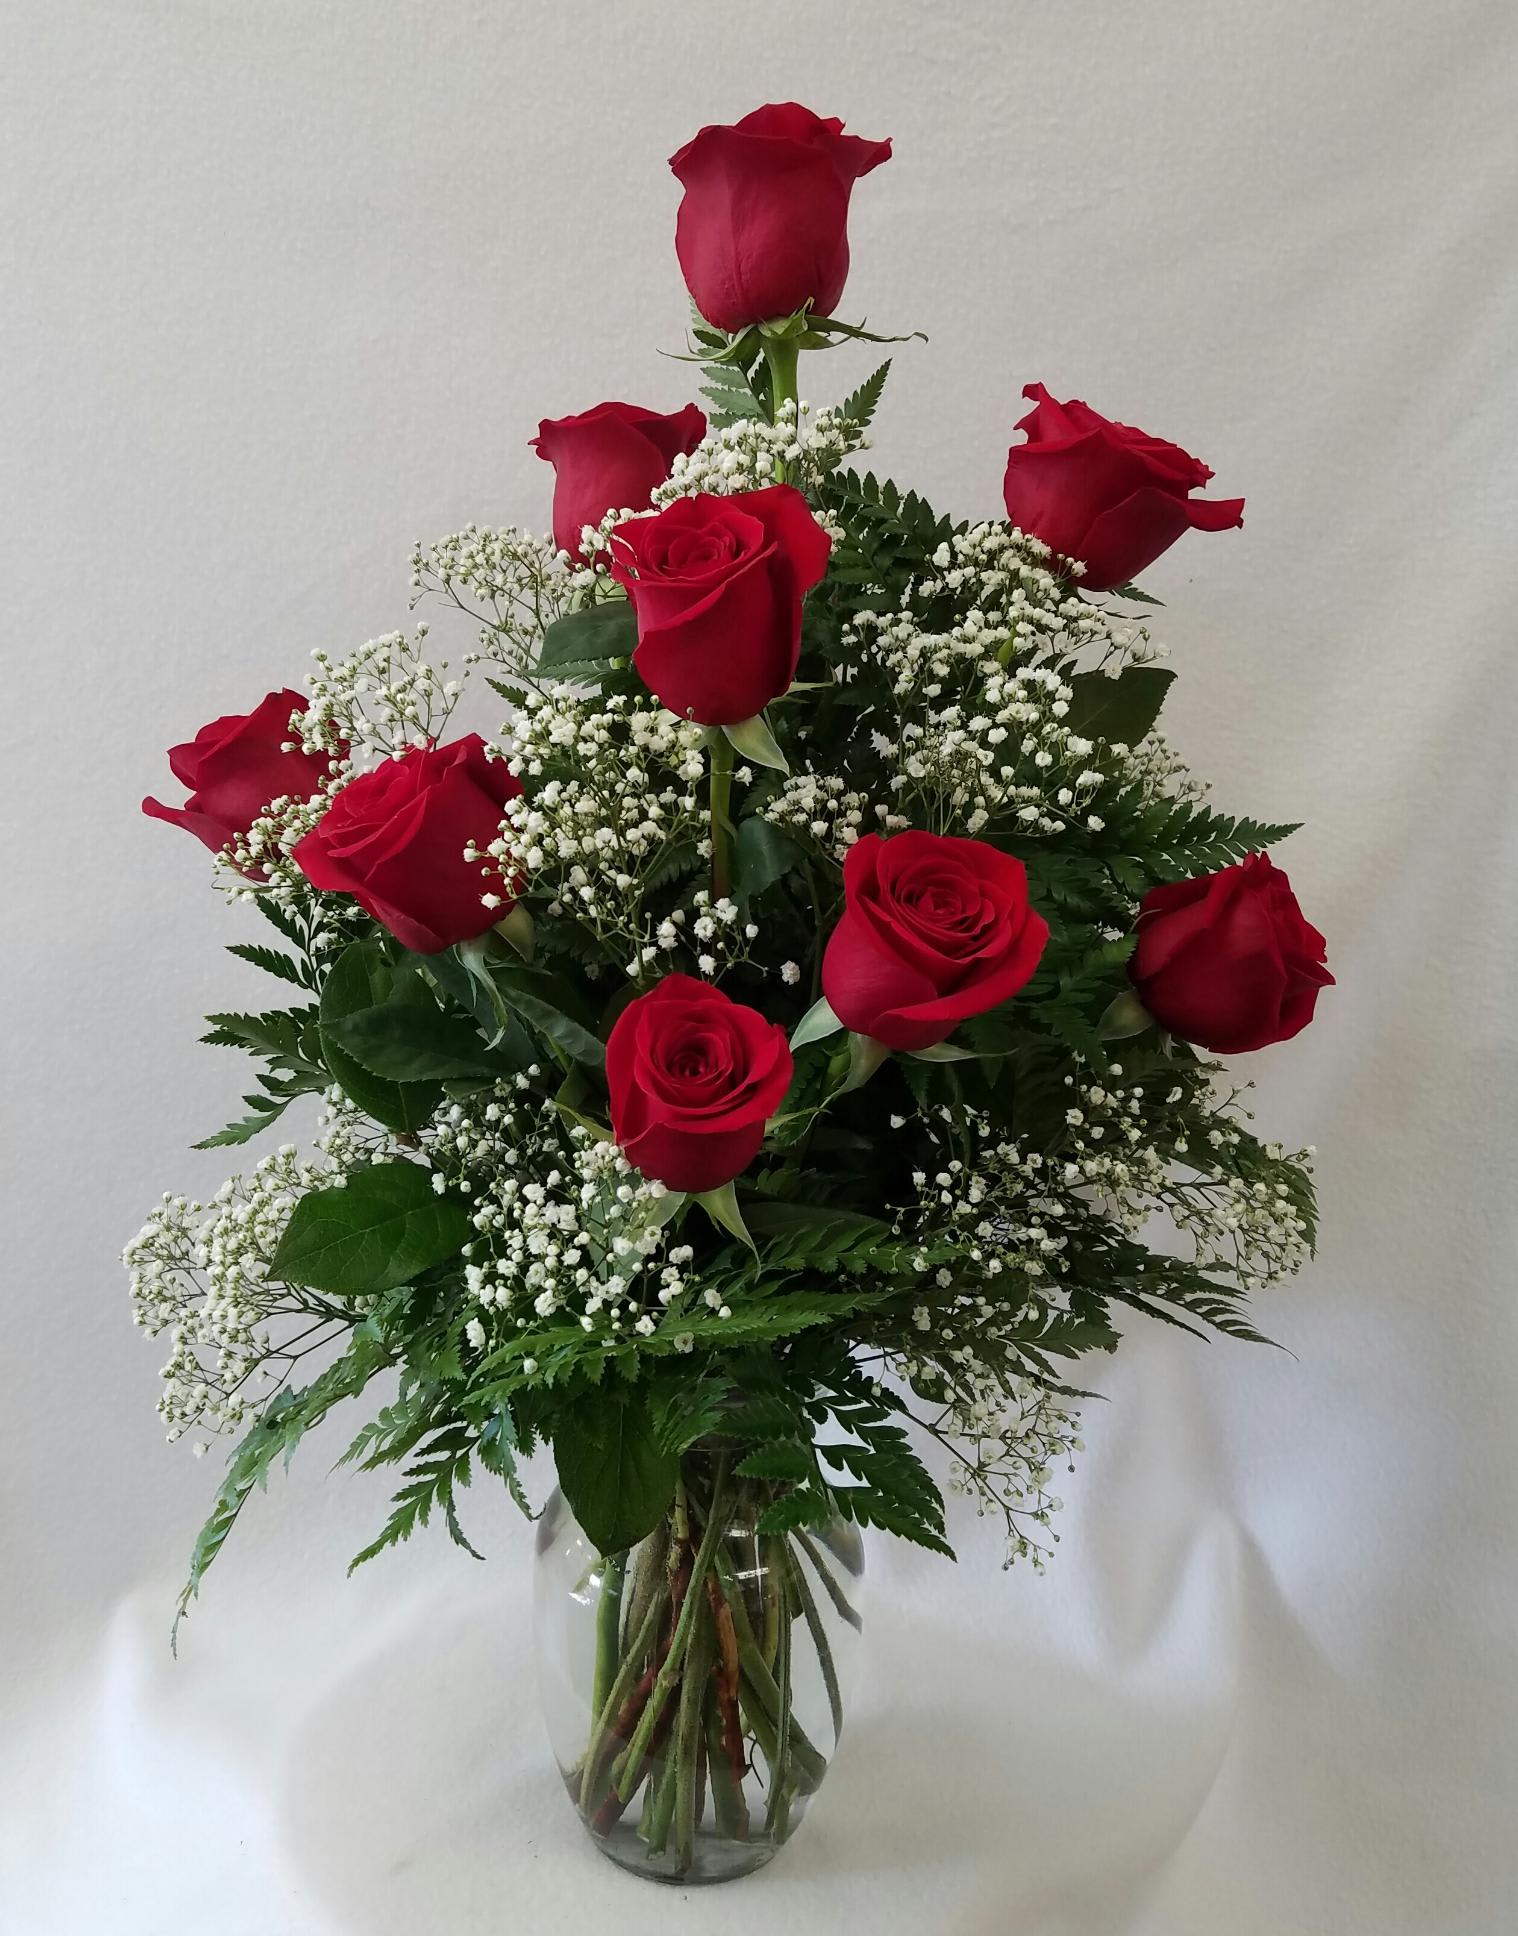  Dozen Red Roses with Filler - 12 red roses with baby''s breath (or other filler) in a clear glass vase. Deluxe: 18 roses.  Premium:  24 roses  Also available in white, yellow, orange, peach/pink, and many bi-colors. Please call to inquire about what is available! 